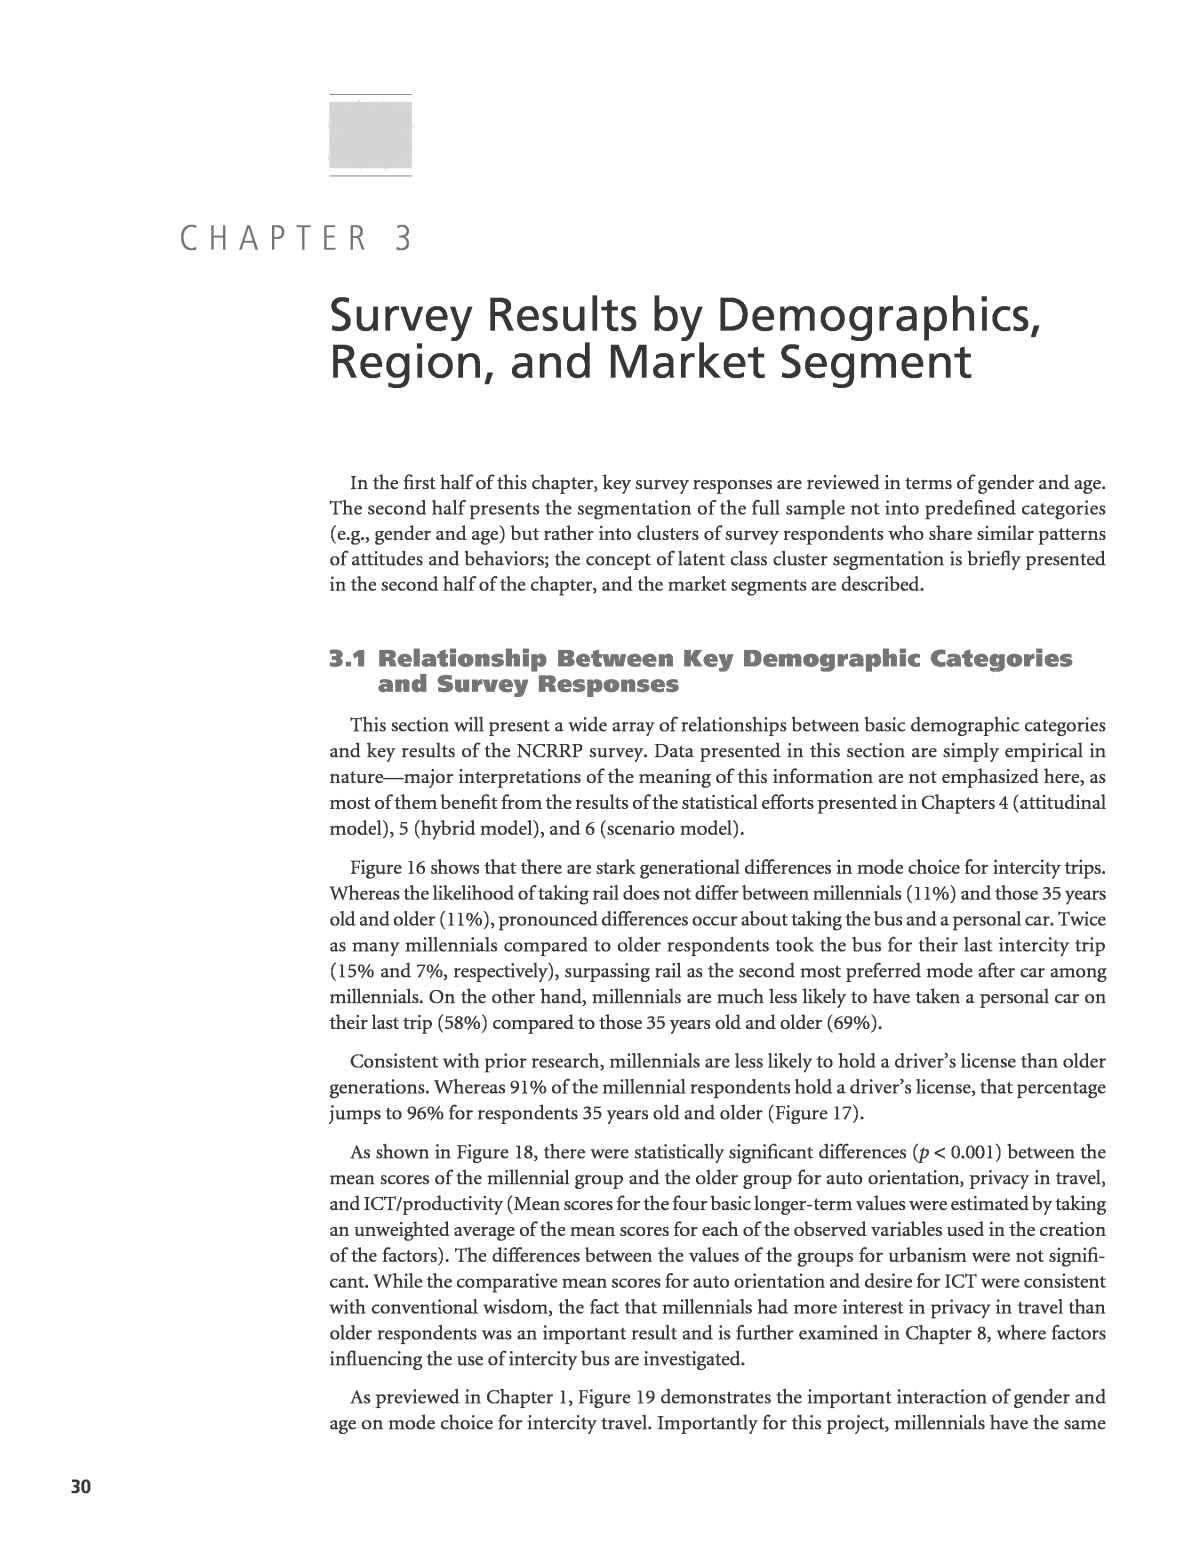 Chapter 30 - Survey Results by Demographics, Region, and Market